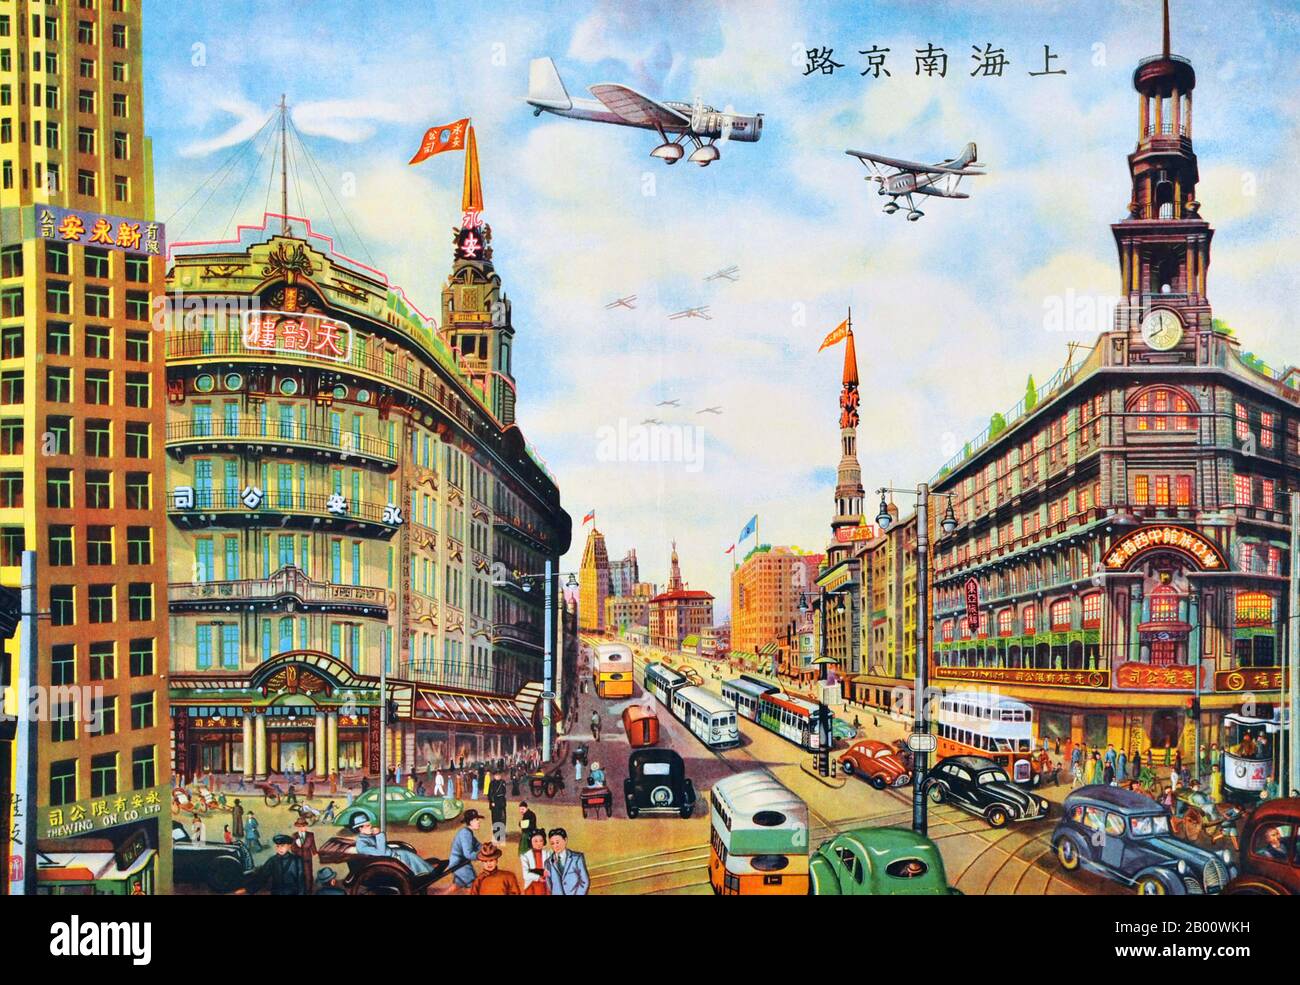 China: 'A View of Shanghai's Nanjing Road,' Chromolithograph on paper by Zhao Weimin, c. 1937.  International attention to Shanghai grew in the 19th century due to its economic and trade potential at the Yangtze River. During the First Opium War (1839–1842), British forces temporarily held the city. The war ended with the 1842 Treaty of Nanjing, opening Shanghai and other ports to international trade. In 1863, the British settlement, located in Huangpu district) and the American settlement, in Hongkou district, joined in order to form the International Settlement. Stock Photo